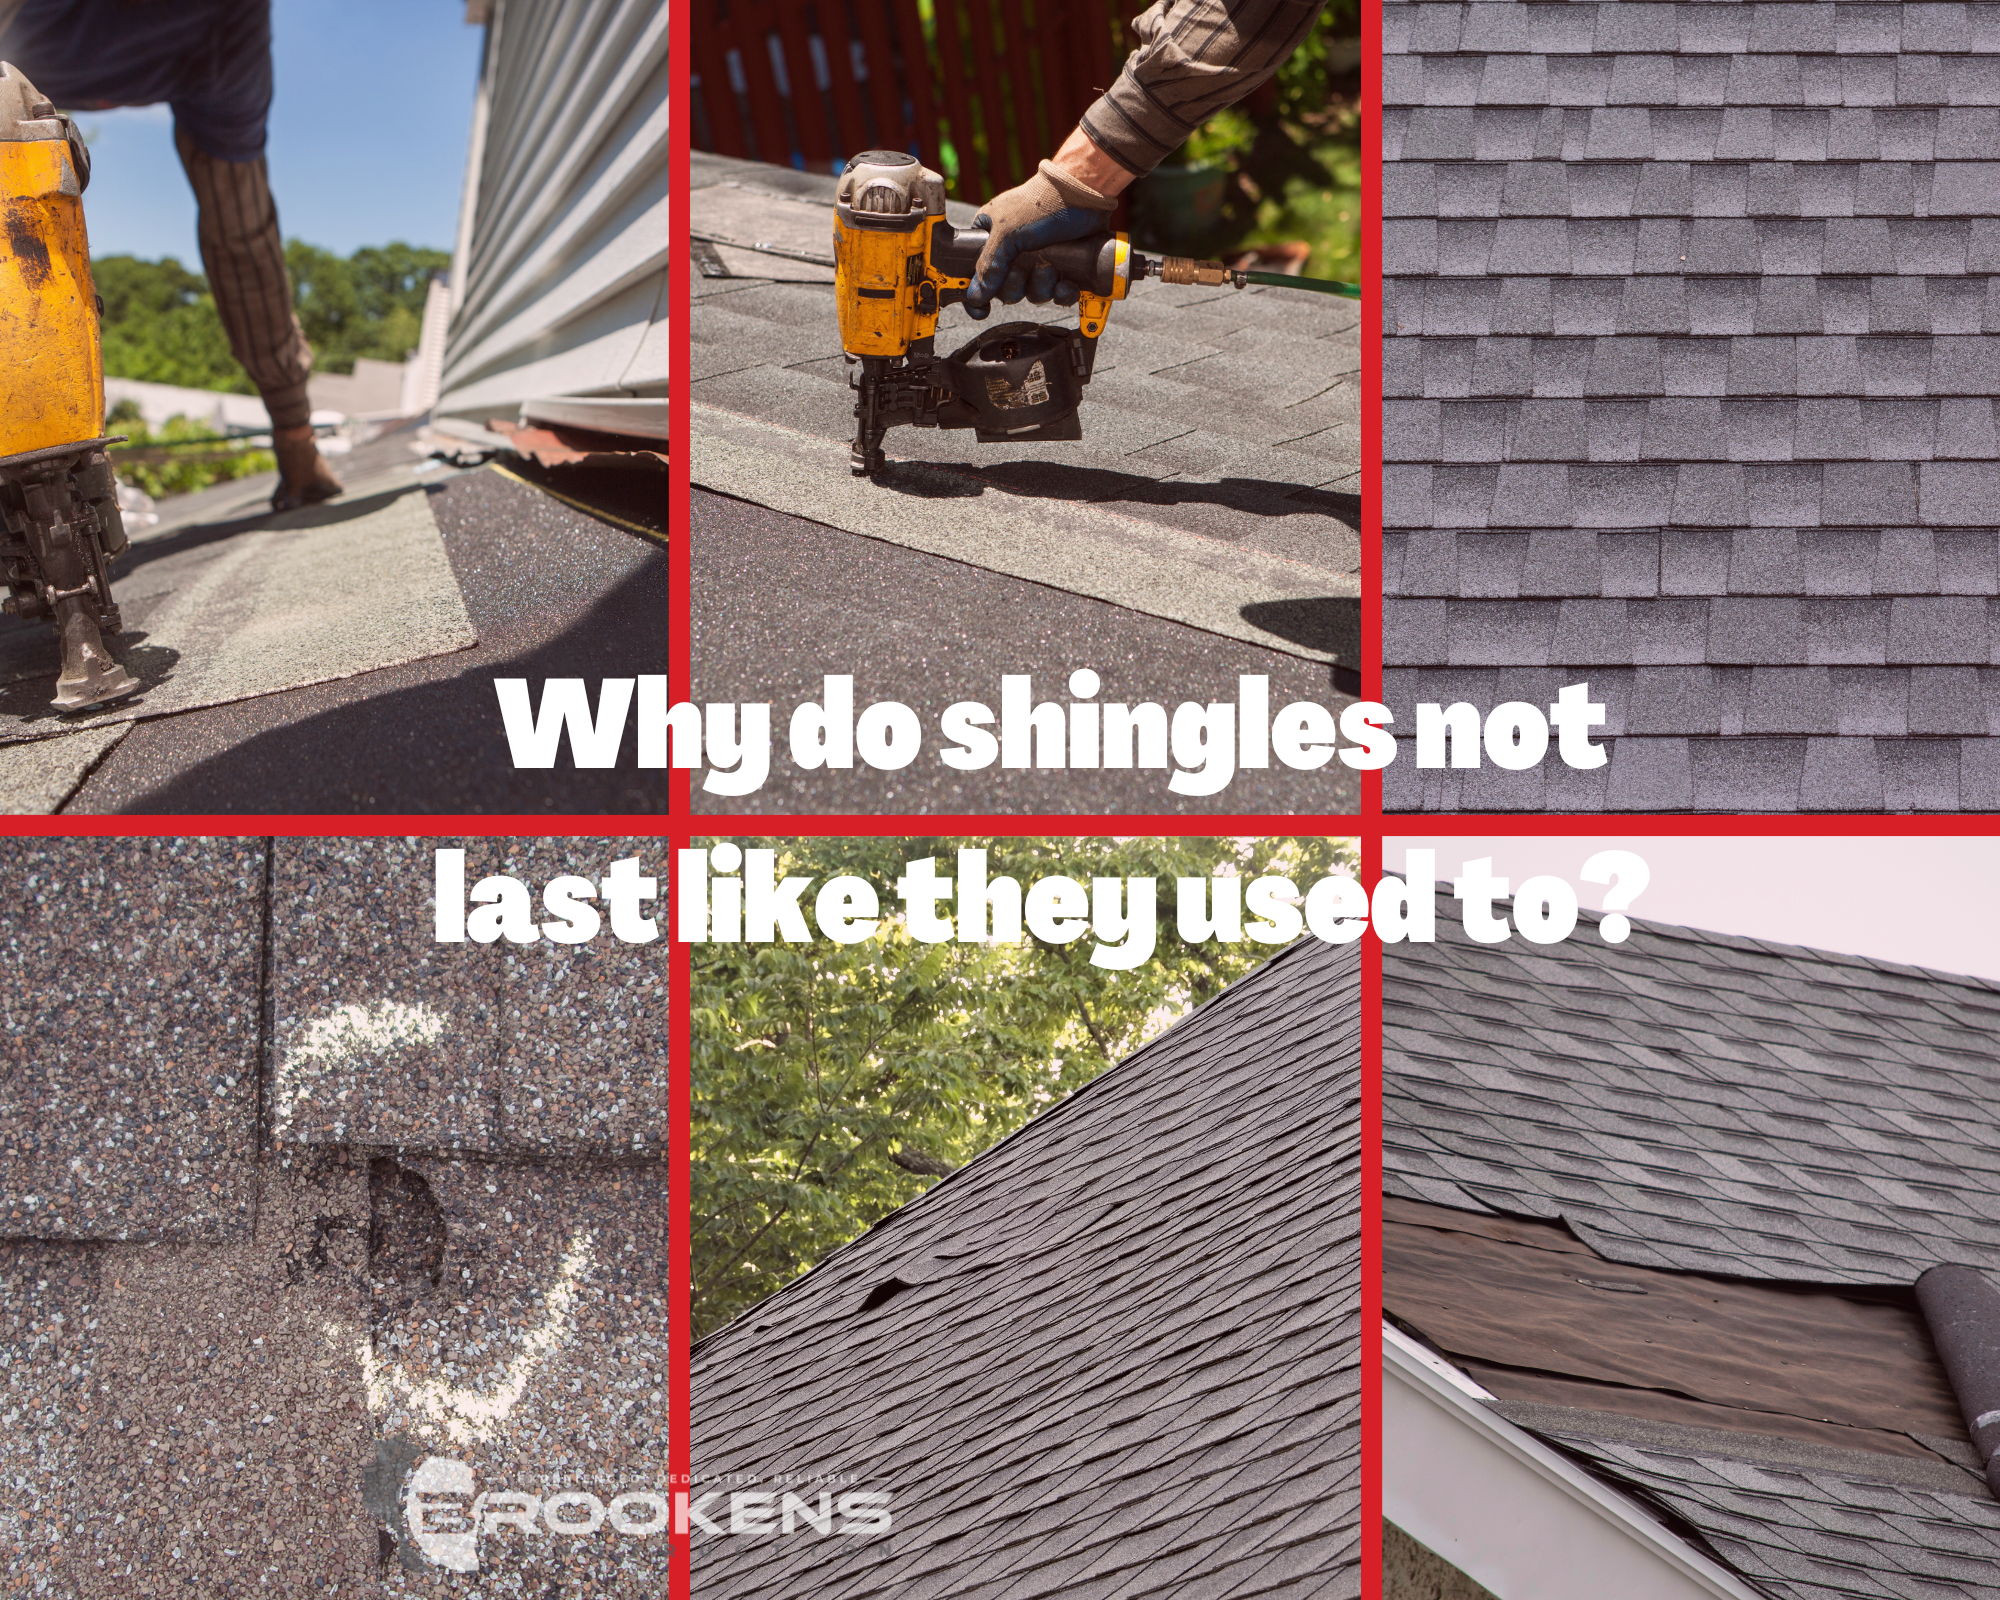 The Truth About Roofing Shingles: Why They Don’t Last Like They Used To?